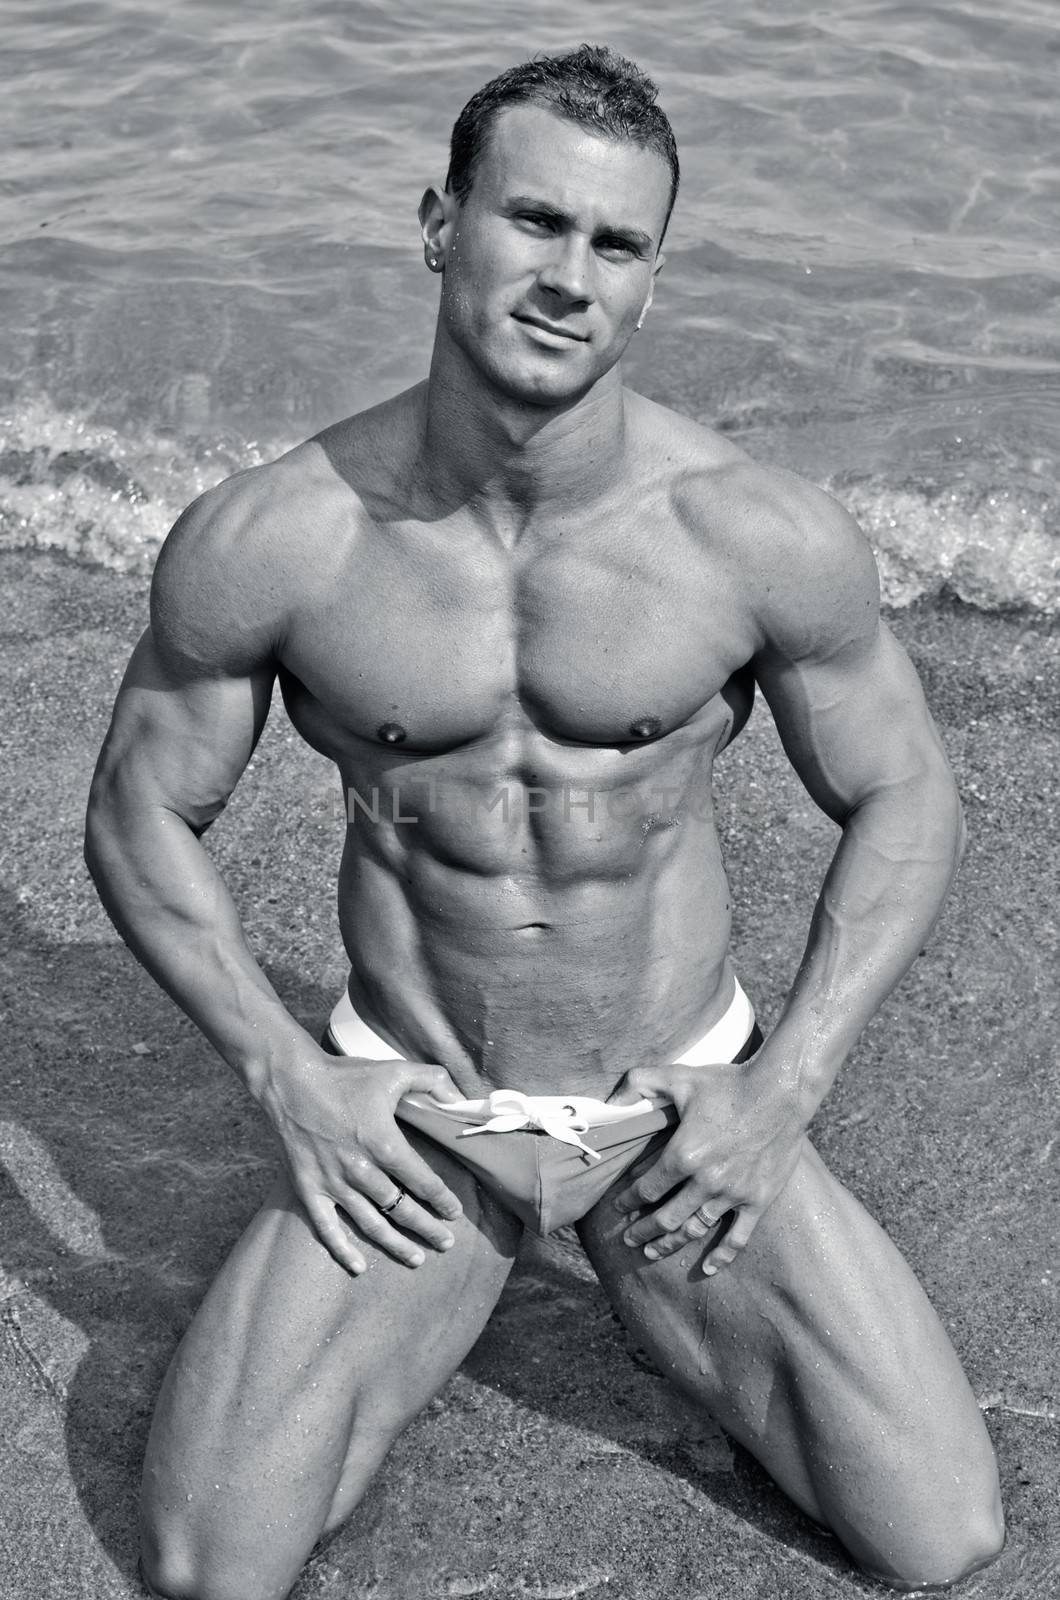 Attractive and fit young bodybuilder in bathing suit kneeling on the beach, black and white shot